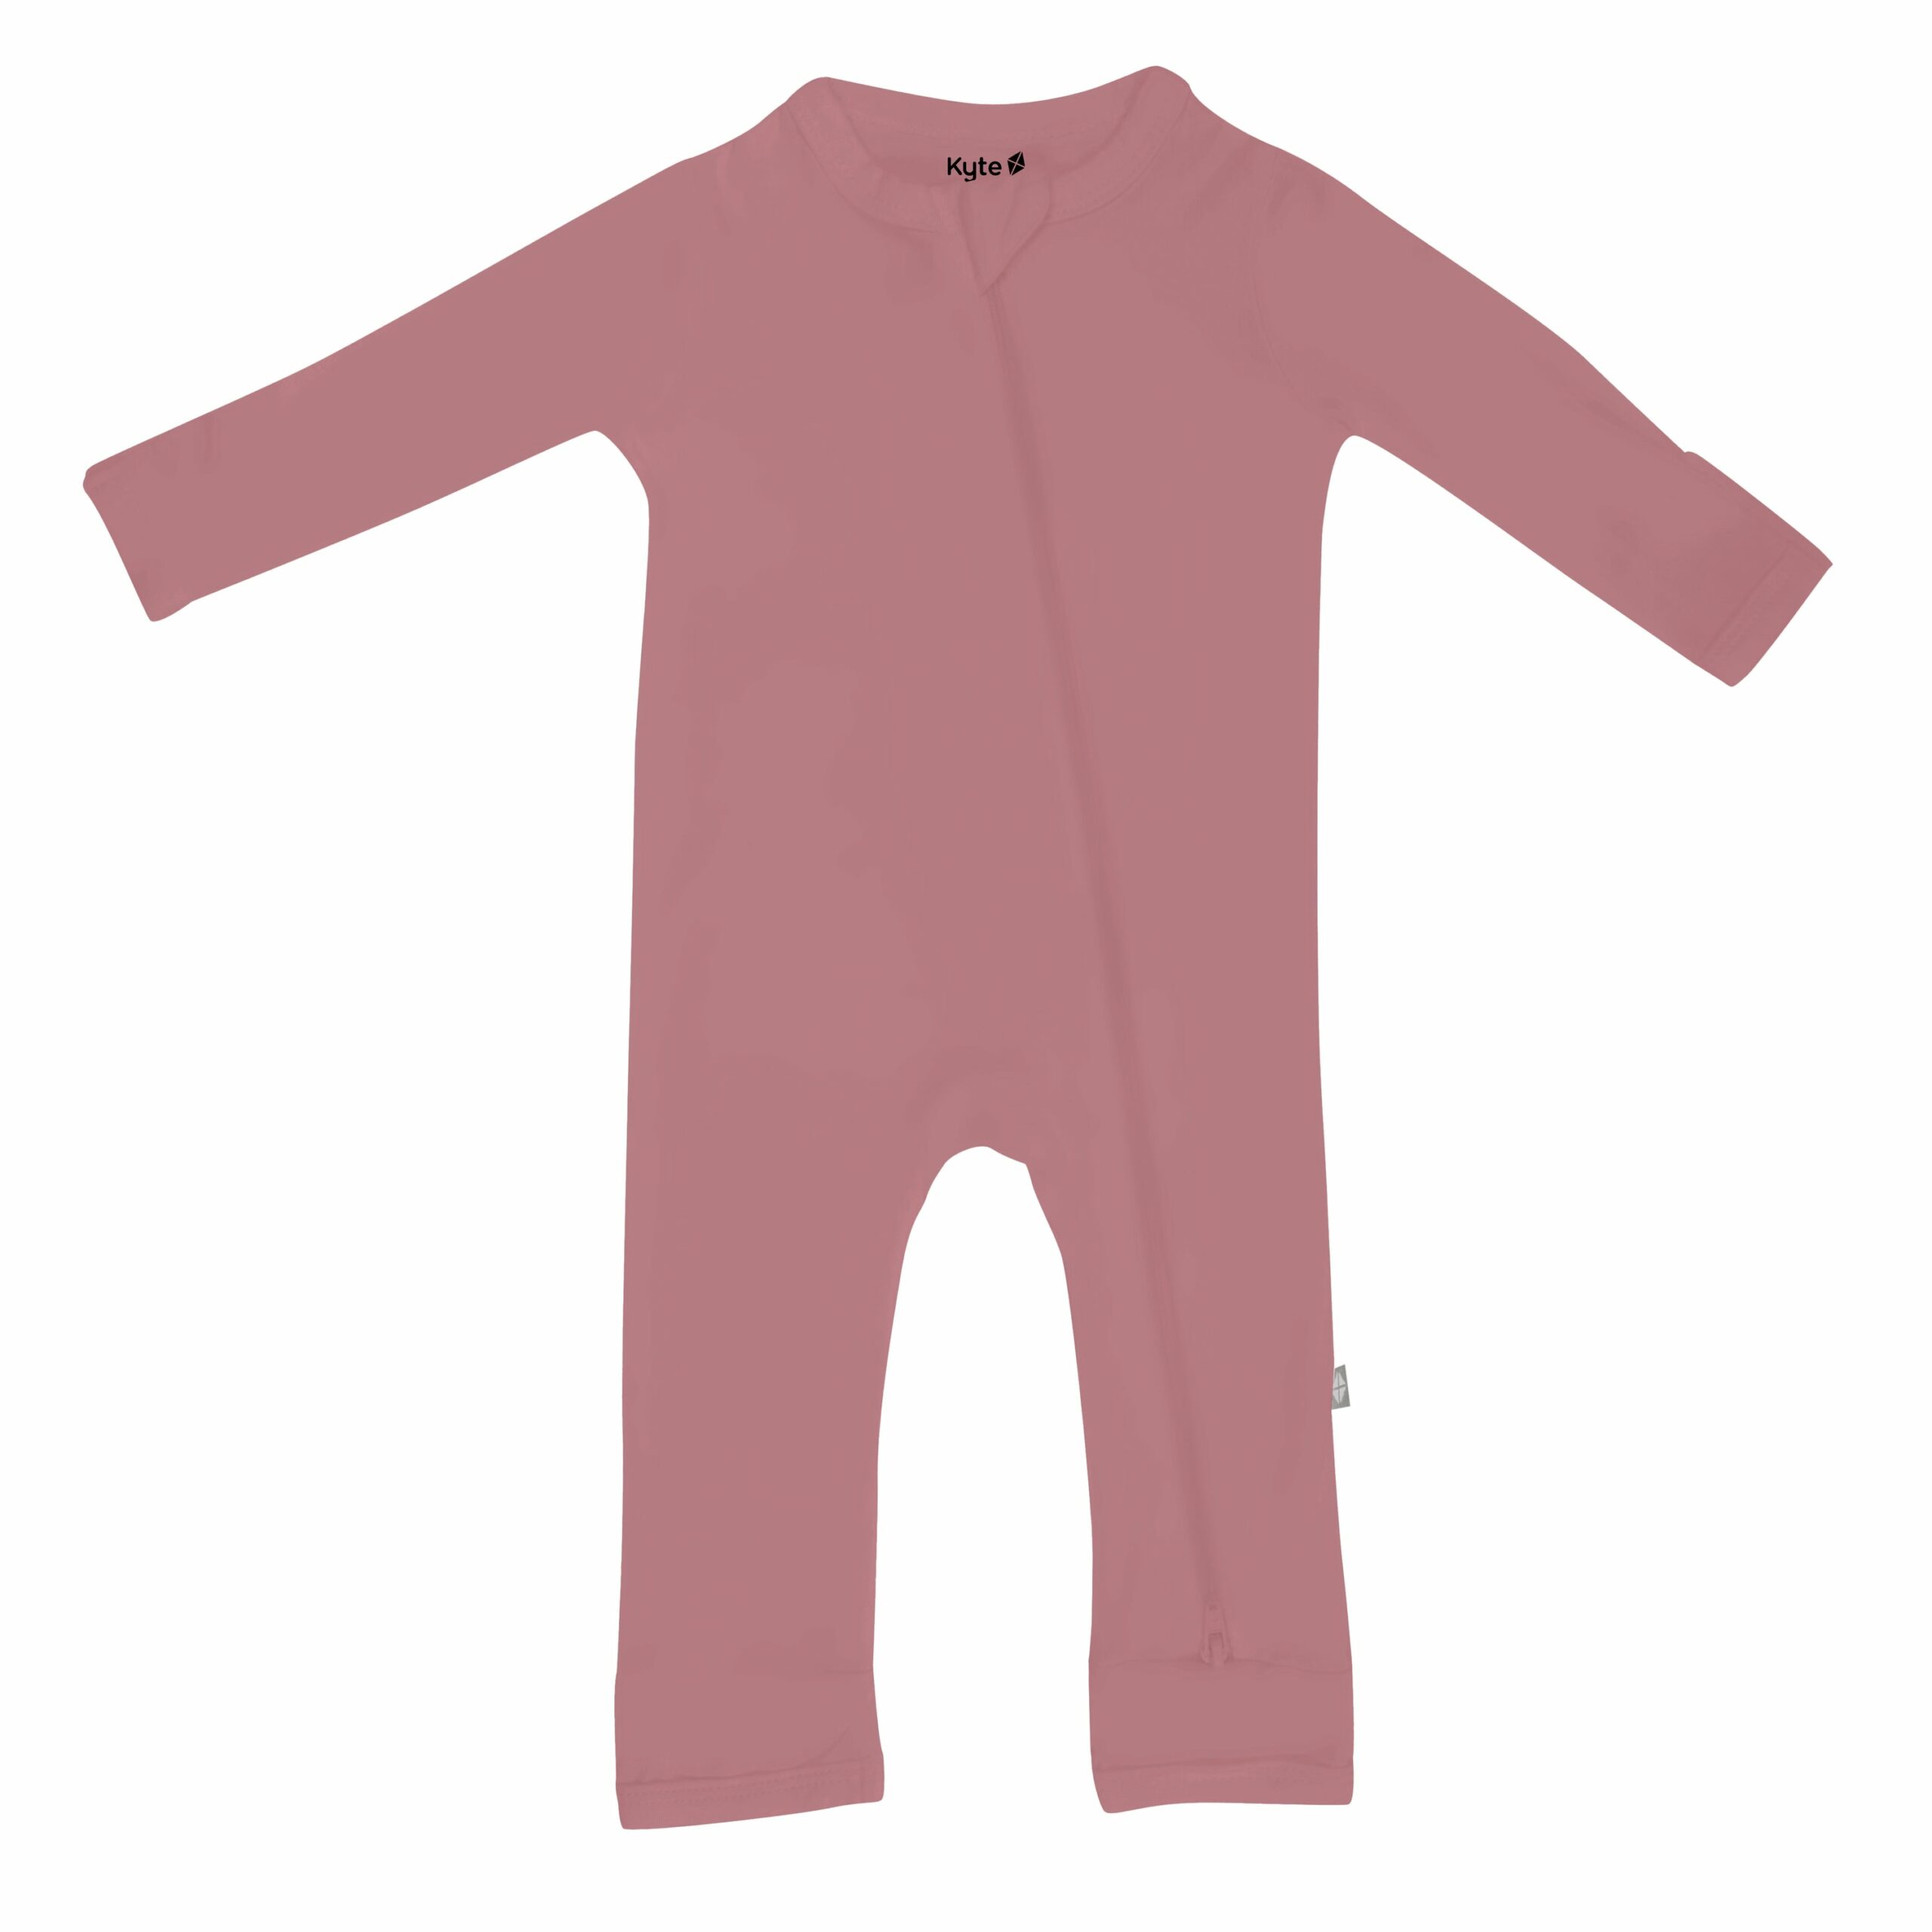 Zippered Romper in Dusty Rose from Kyte BABY